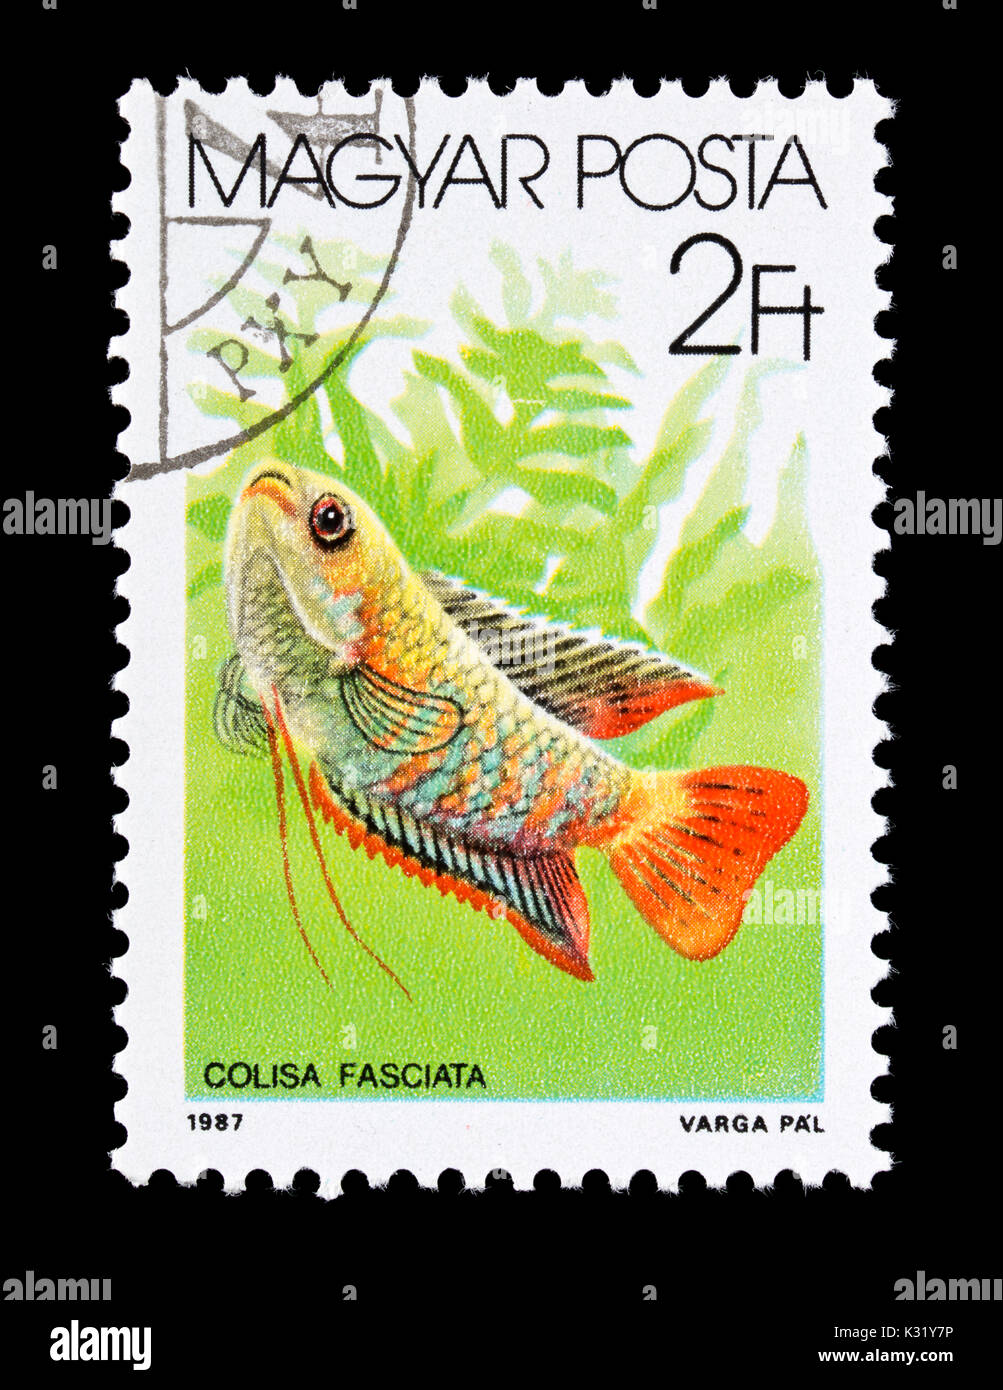 Postage stamp from Hungary depicting banded gourami (Colisa fasciata) Stock Photo